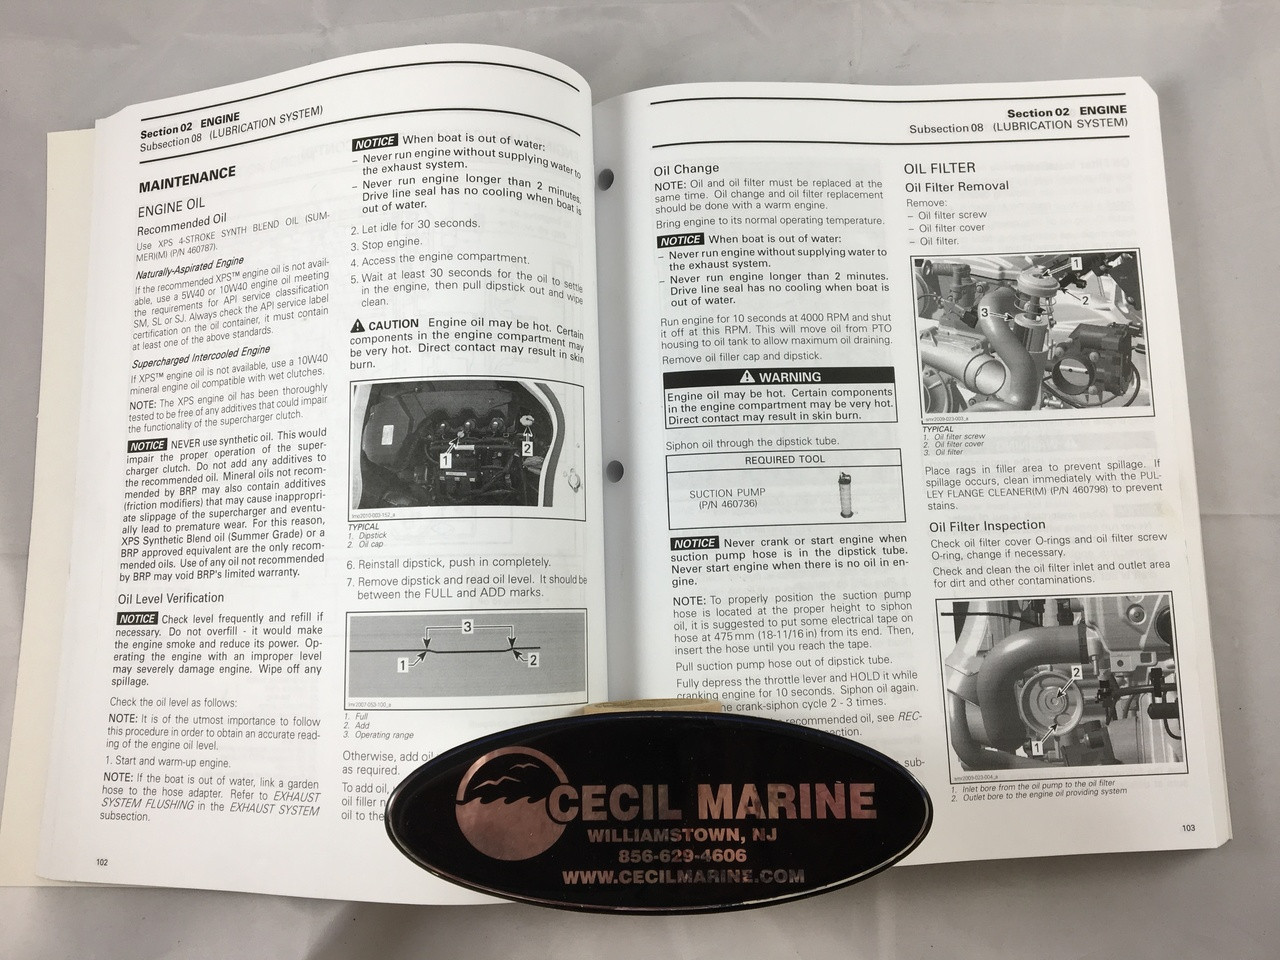 GENUINE BRP SERVICE MANUAL 150 - 200 - 250 FOR CHAPARRAL ...